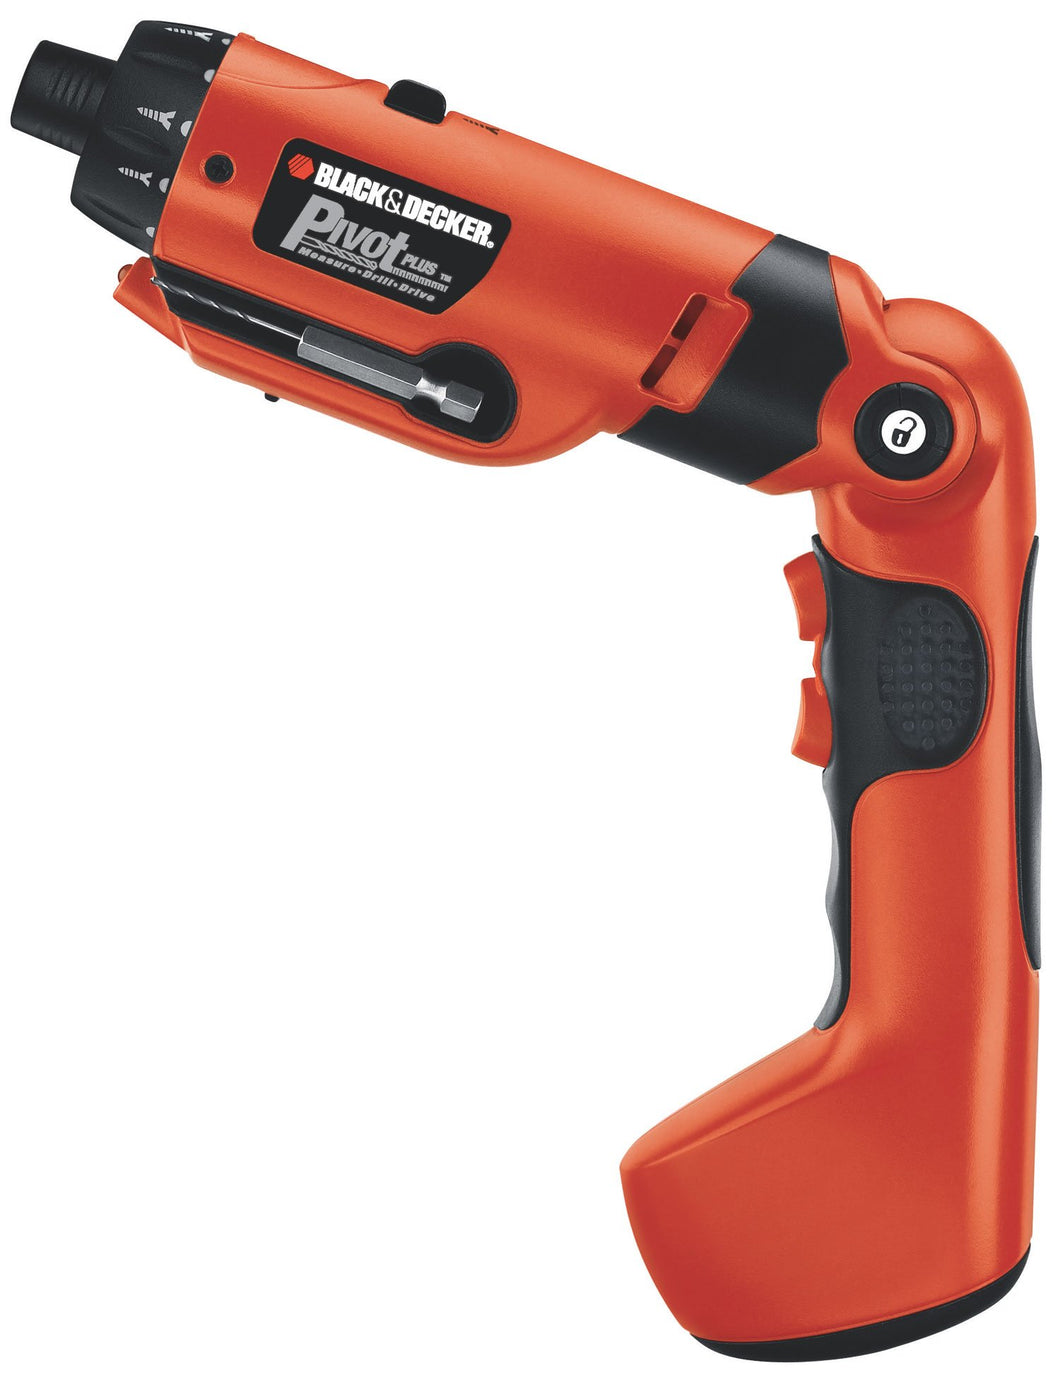 Black & Decker | High Quality | New Tools | Included Components: PD600 Drill/Driver, (2) 2 inch Hex Shank Screw driving Bits, Charger | 6 volt rechargeable drill and screwdriver offers a choice between high speed drilling and low speed driving operations